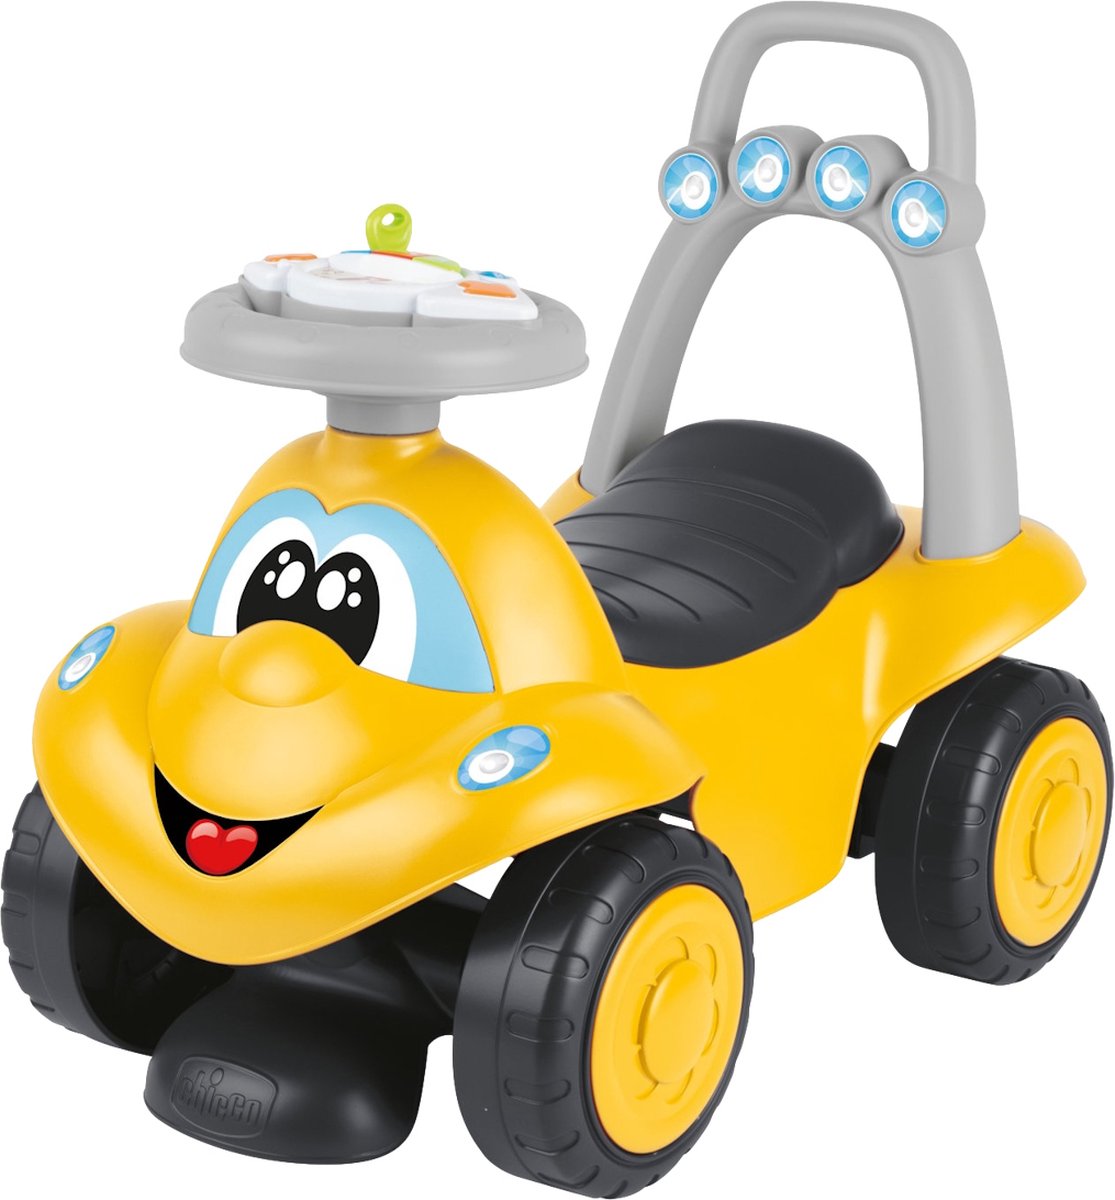 Chicco ECO+ Billy Geel Walk And Ride Loopauto 11211400000 - Chicco